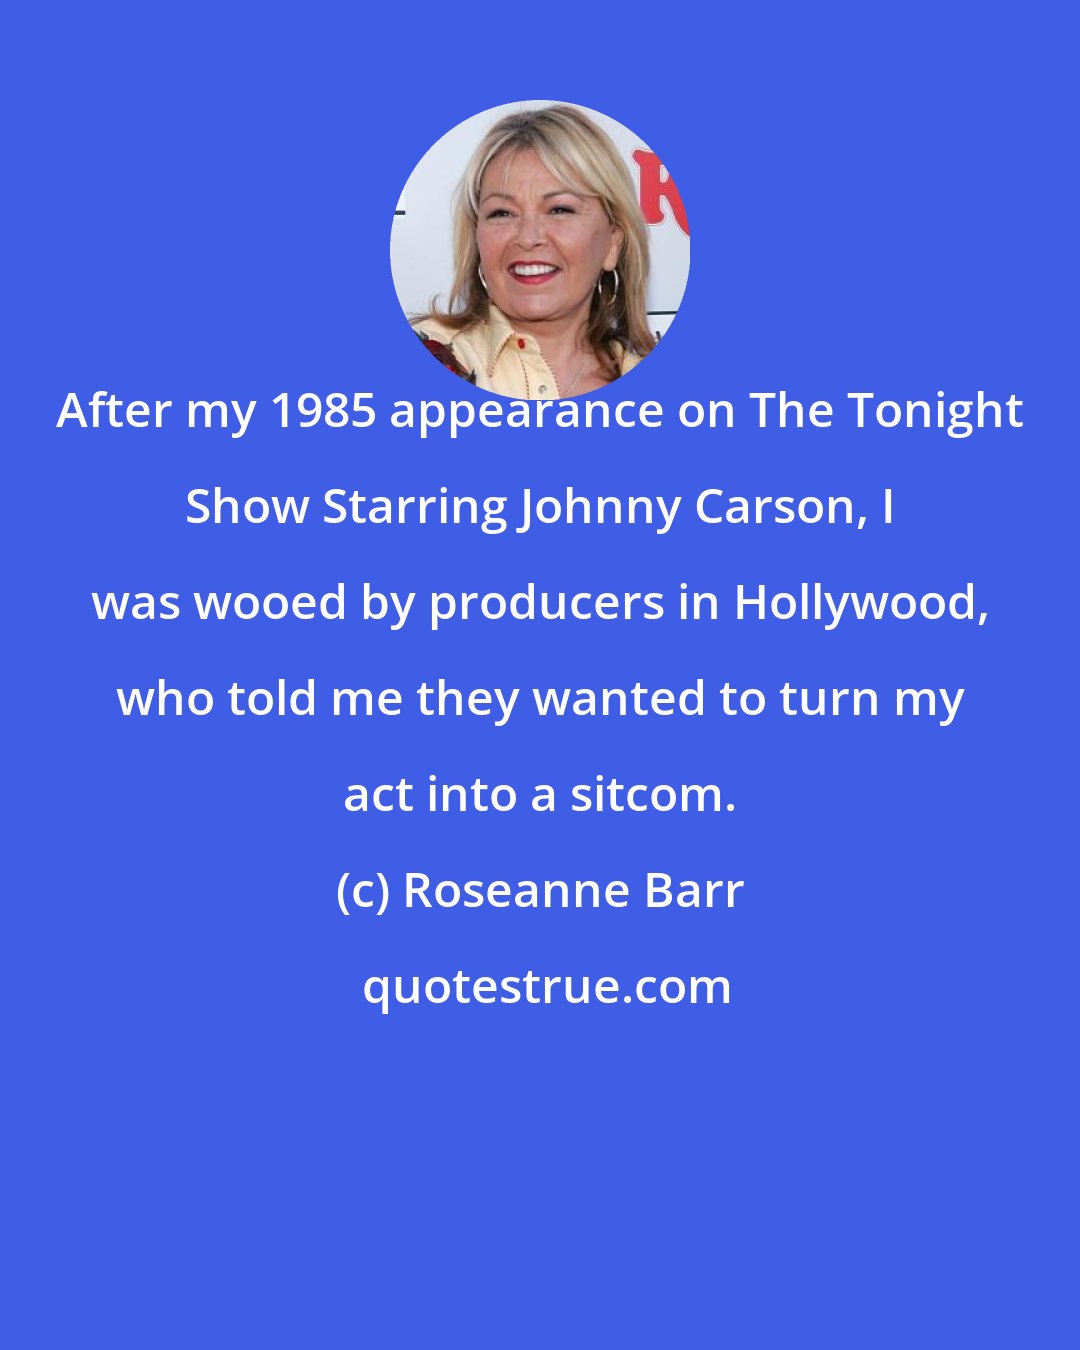 Roseanne Barr: After my 1985 appearance on The Tonight Show Starring Johnny Carson, I was wooed by producers in Hollywood, who told me they wanted to turn my act into a sitcom.